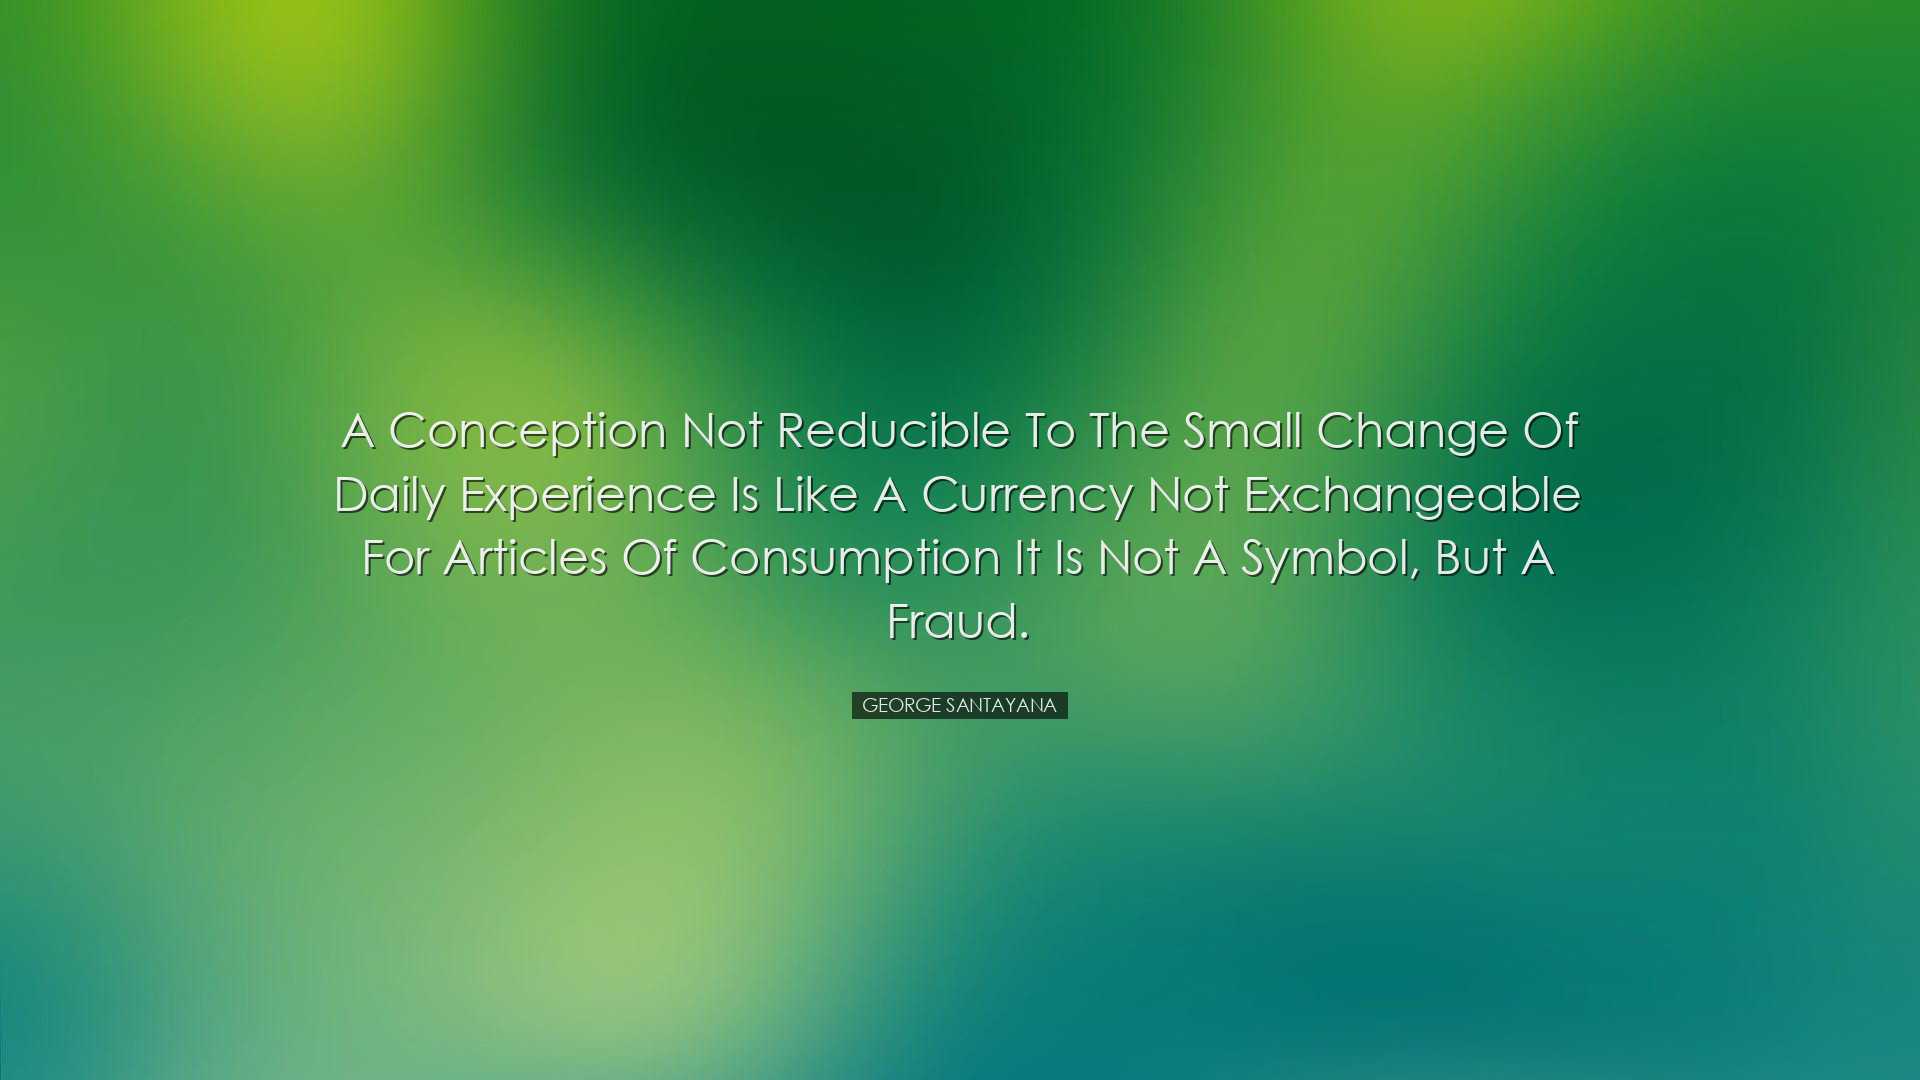 A conception not reducible to the small change of daily experience